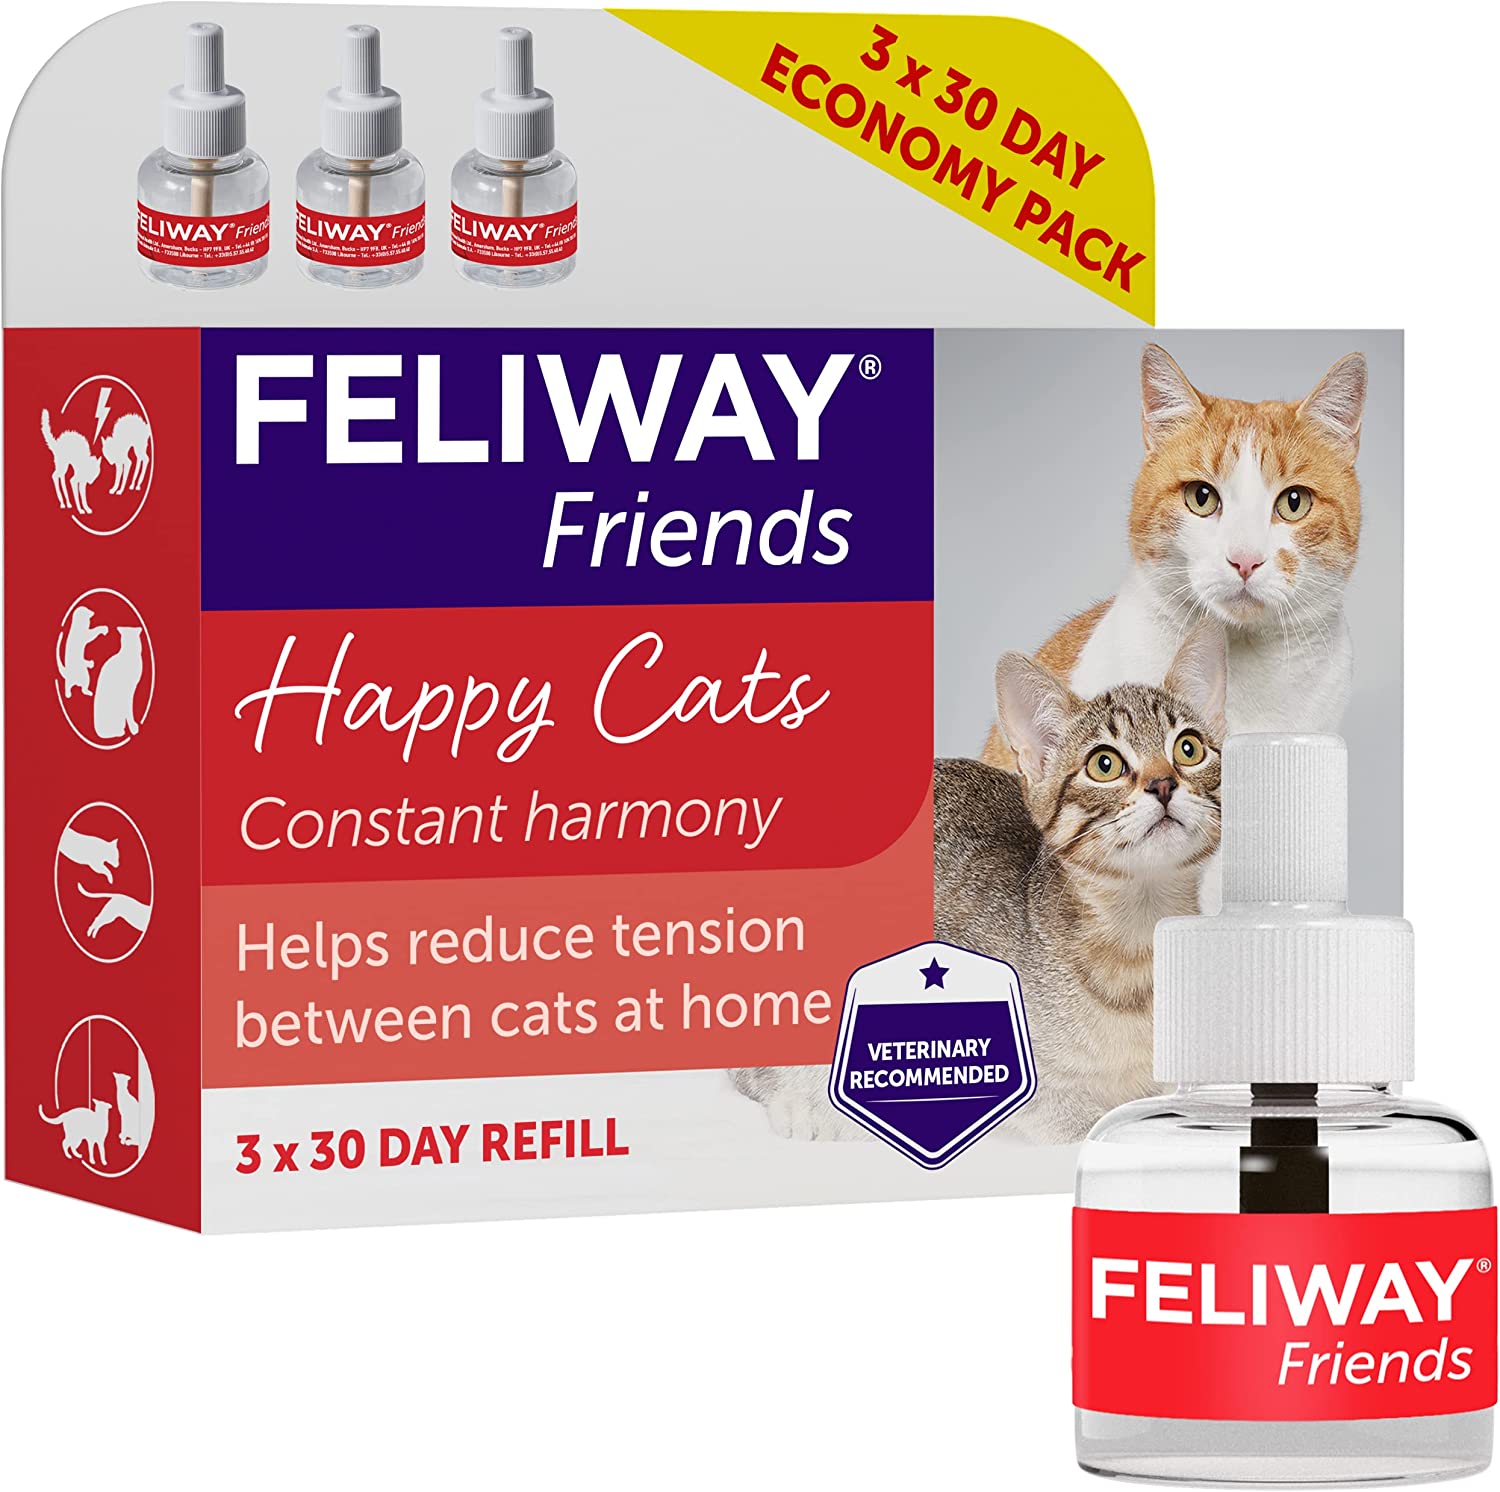 AUTH NEW FELIWAY CLASSIC CONSTANT HARMONY BETWEEN CATS AT HOME SET 4 BAGS